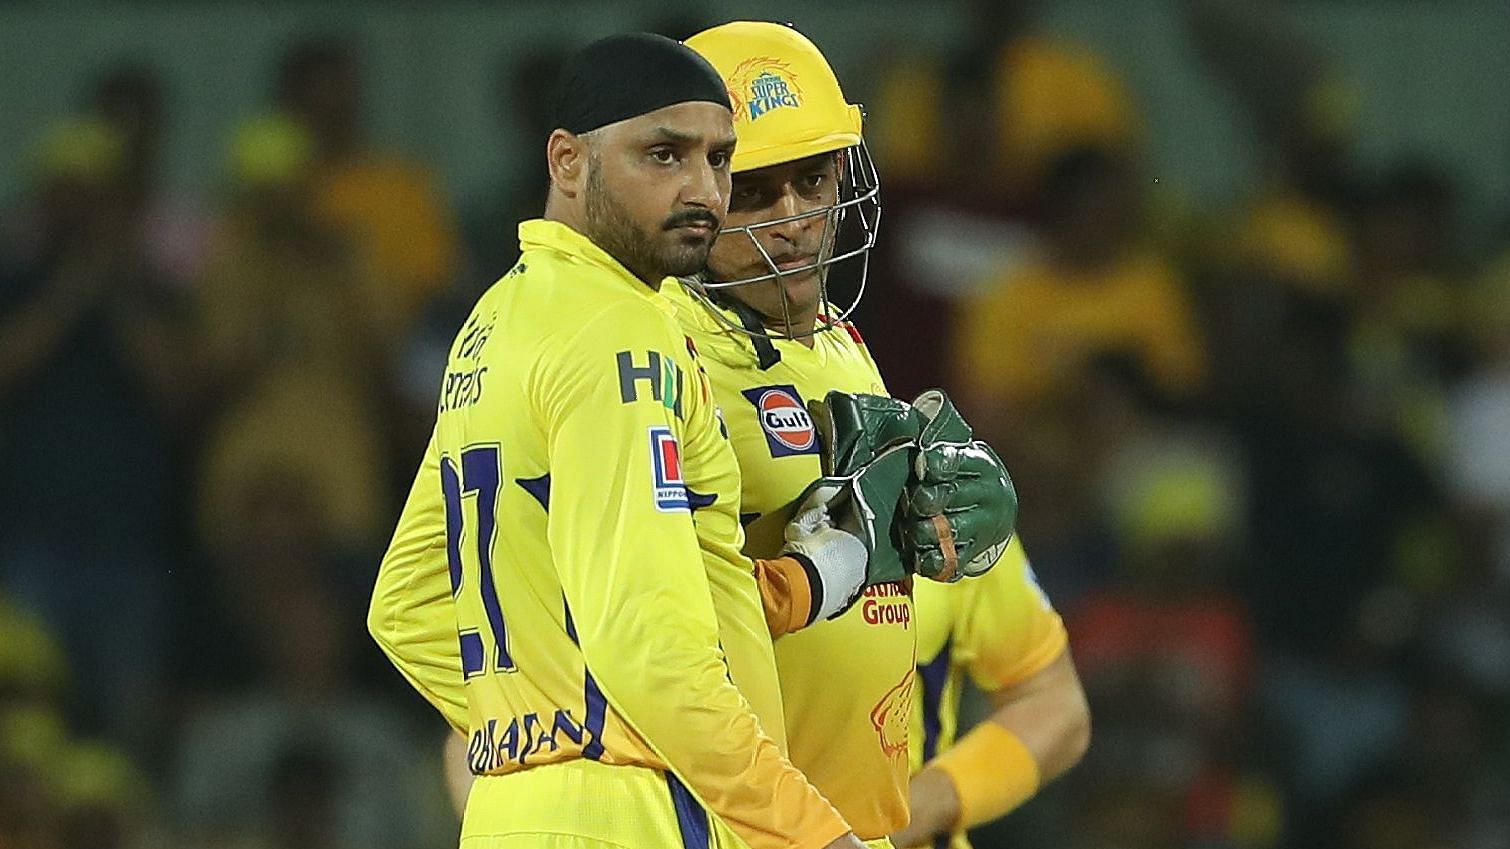 MS Dhoni was all praise for veteran spinners Harbhajan Singh and Imran Tahir, who delivered yet again.